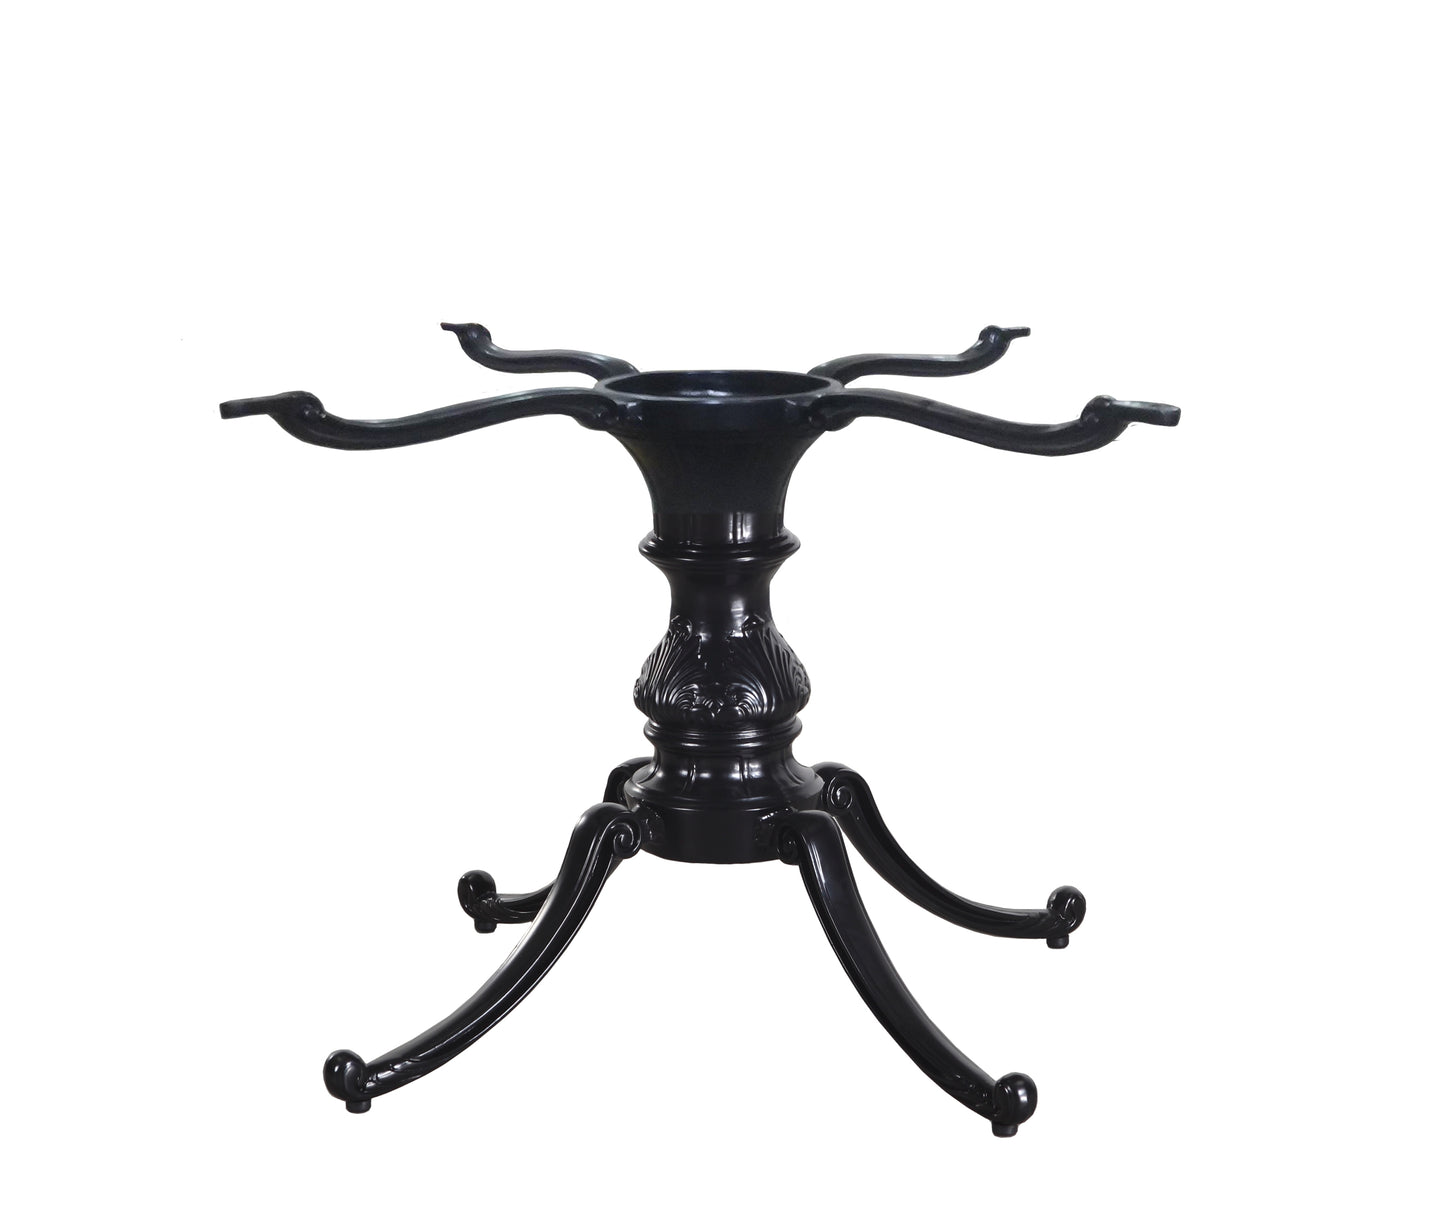 Click to View all Regal Tables & Accessories